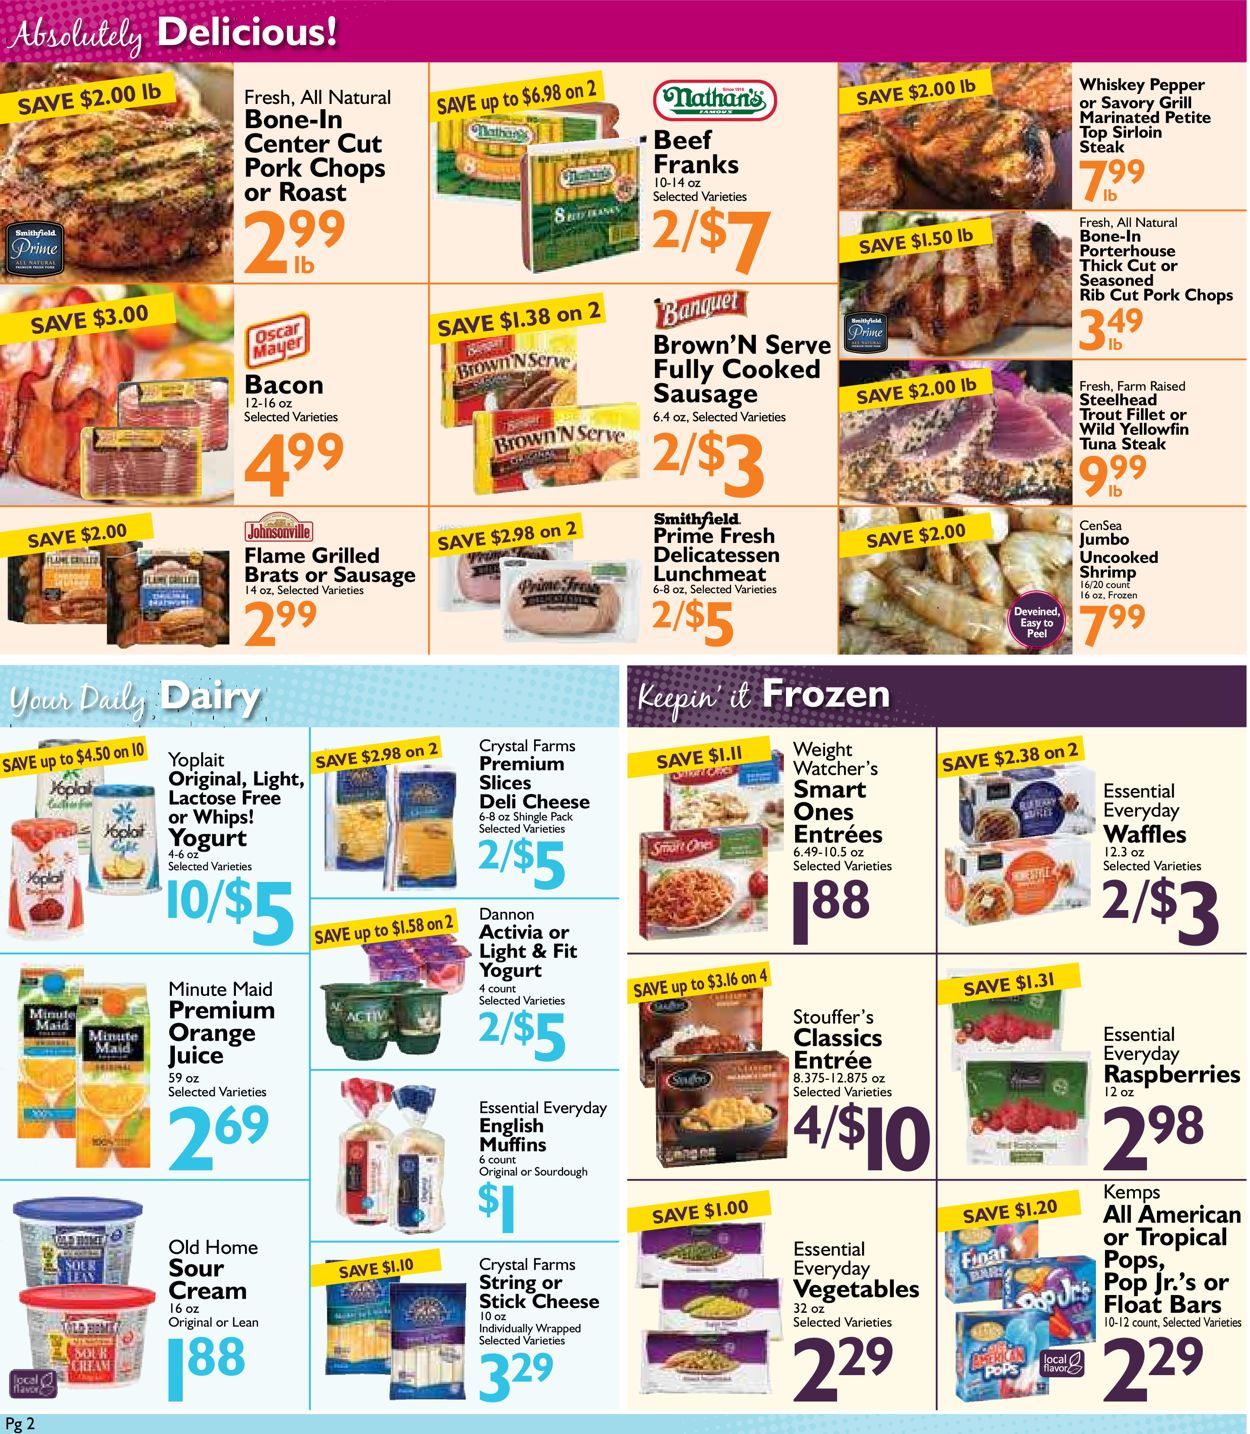 Festival Foods Ad from 04/24/2019